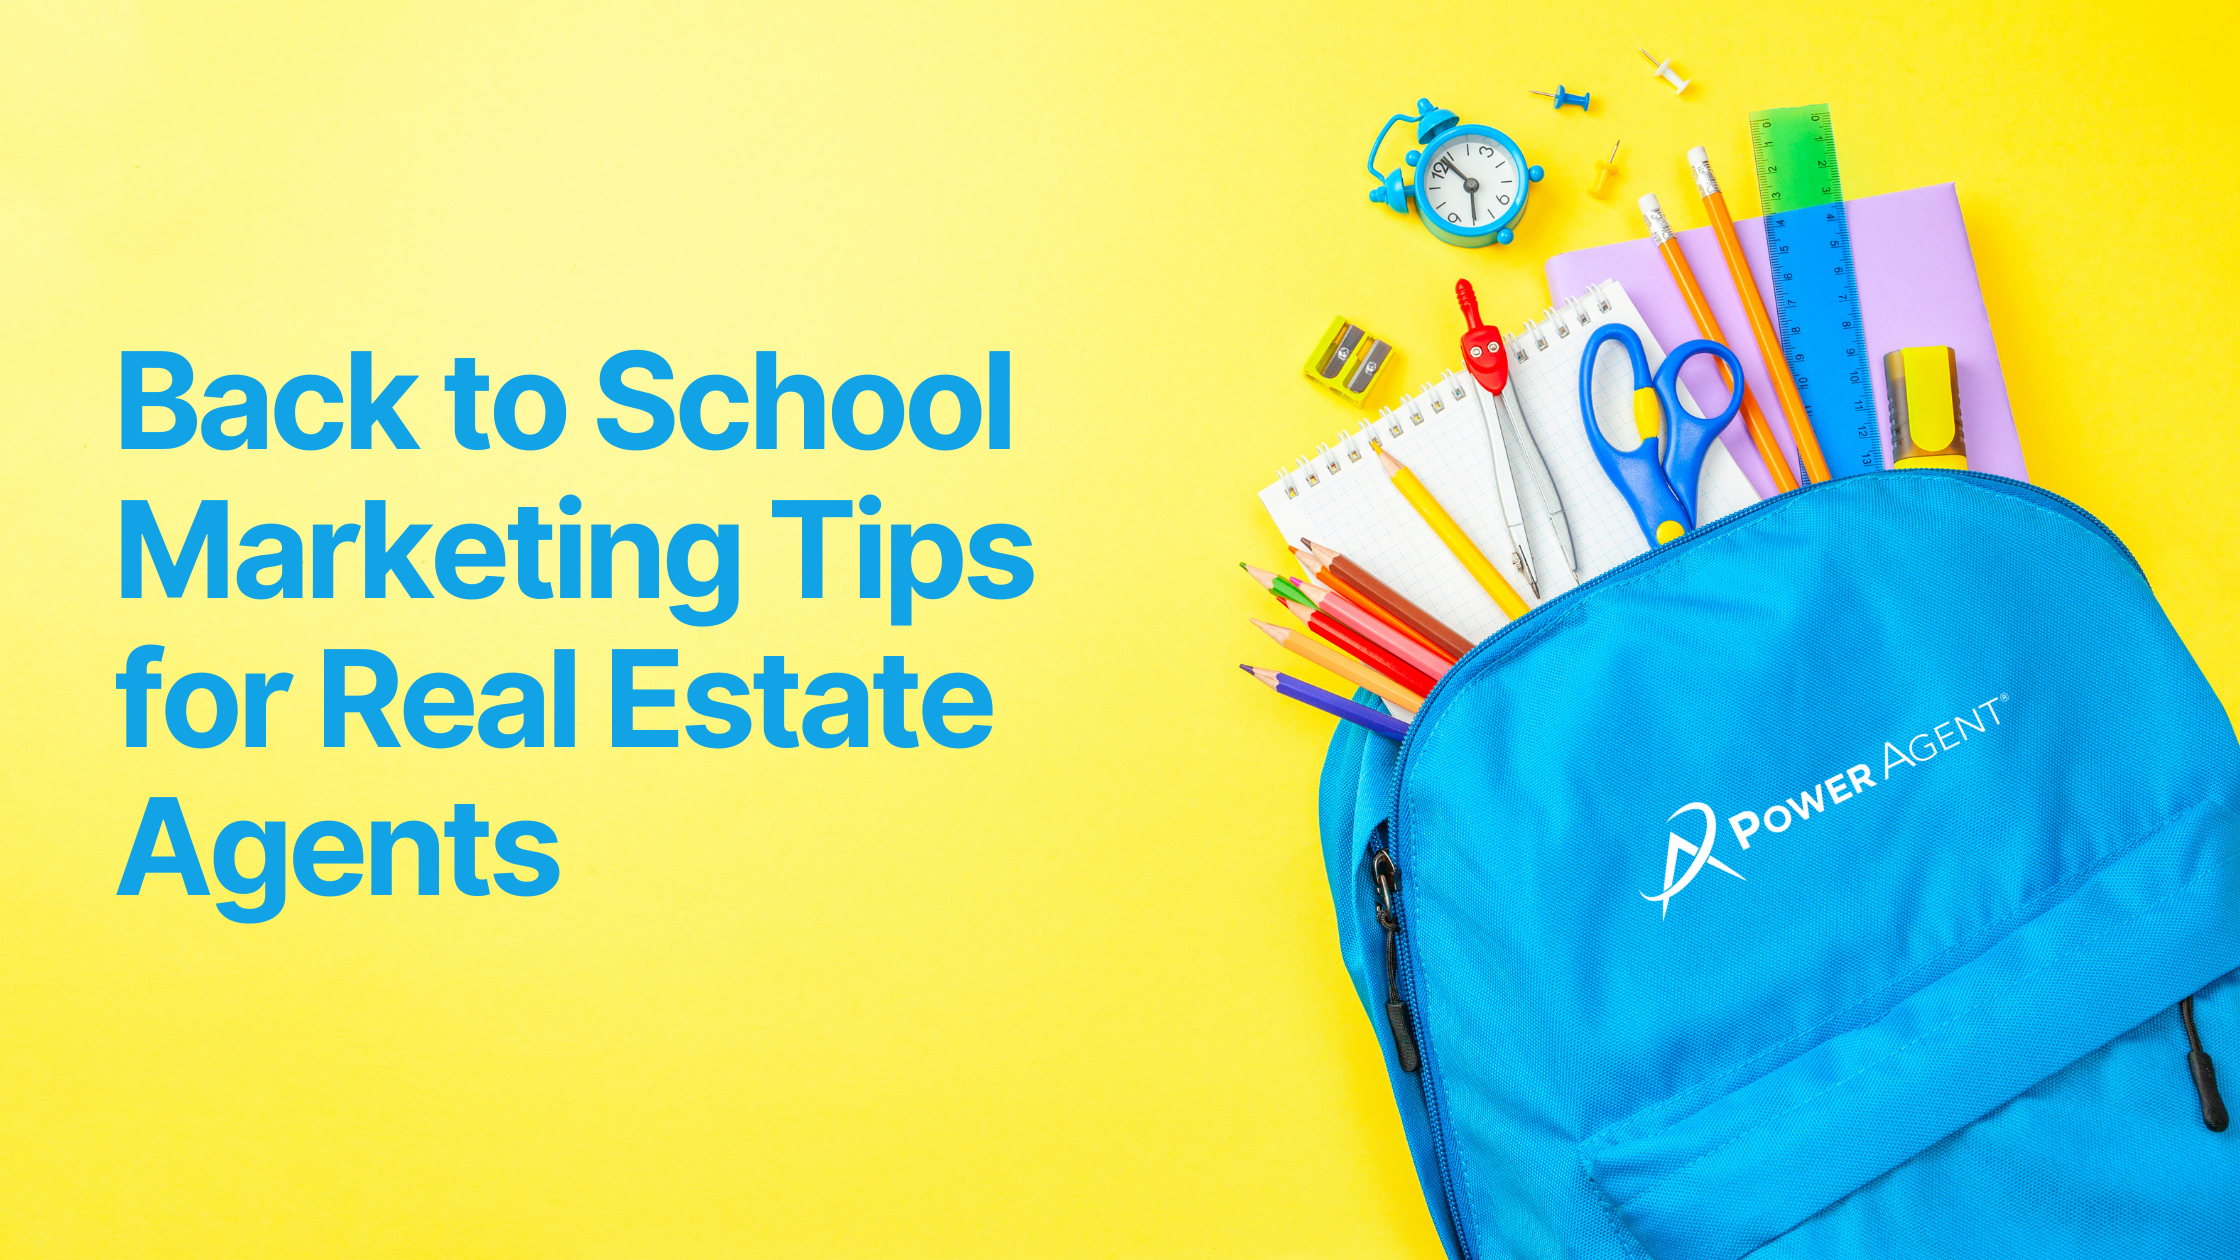 Back to School Marketing Tips for Real Estate Agents